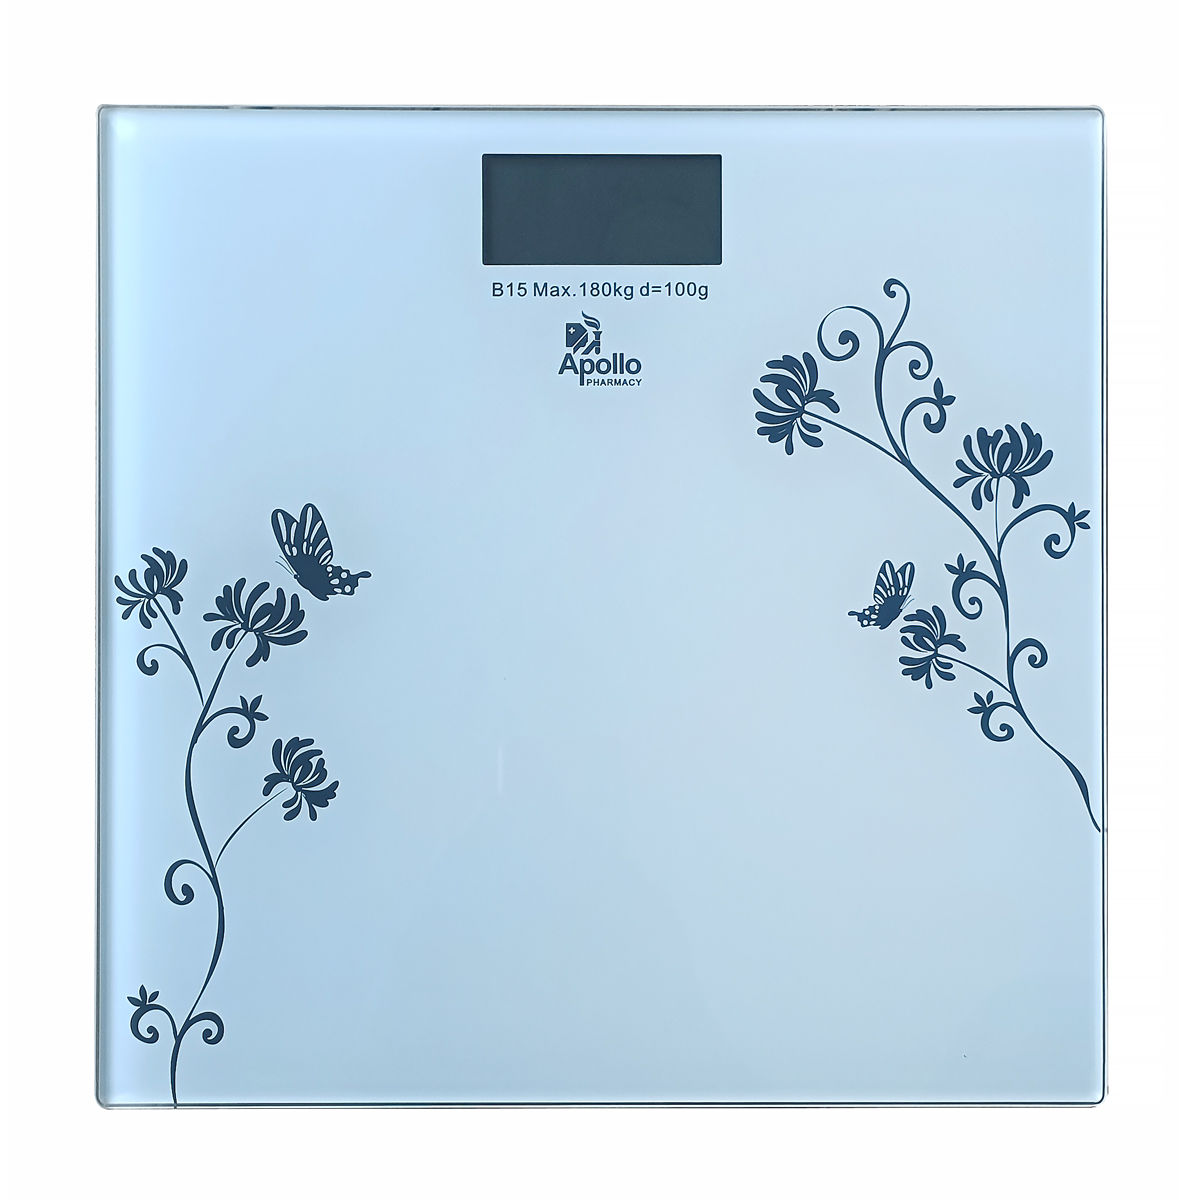 Apollo Pharmacy Digital Personal Weighing Scale, 1 Unit, Pack of 1 